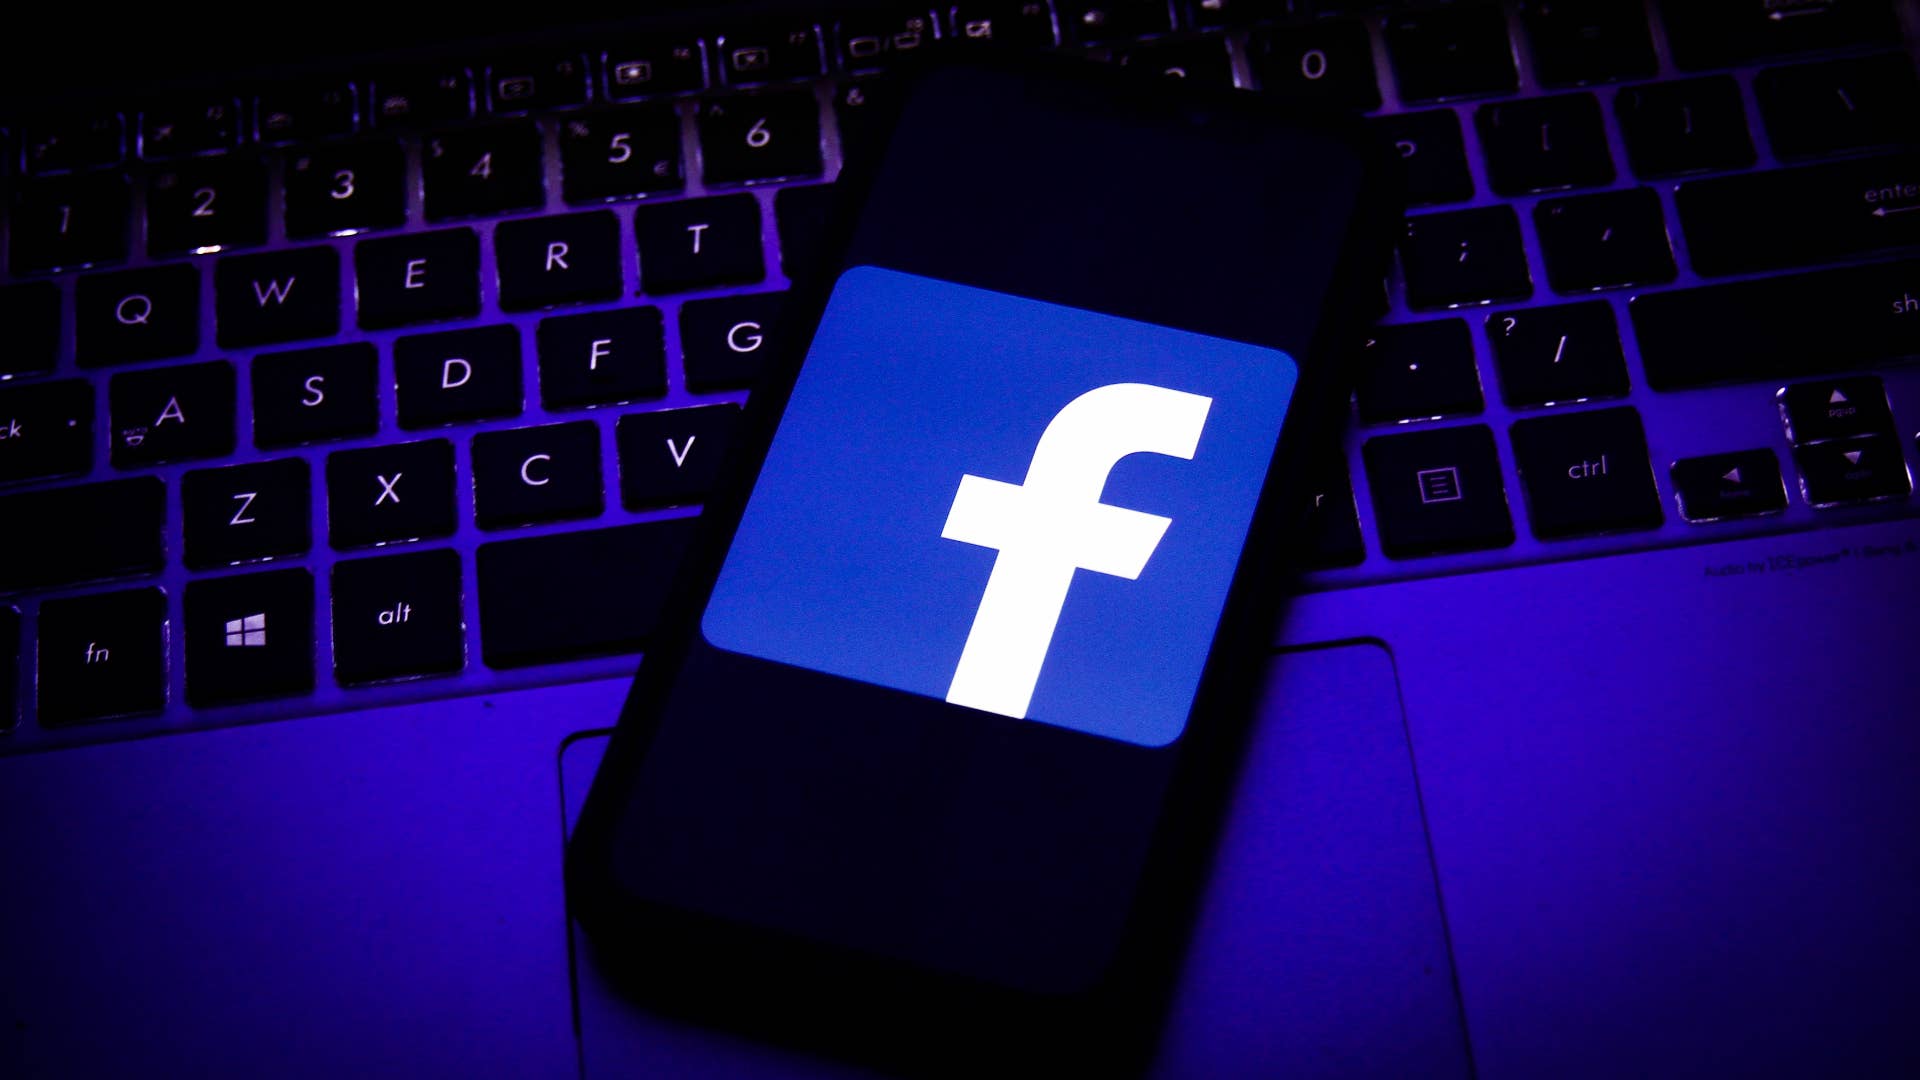 Logo of Facebook displayed on a smartphone screen and keyboard.